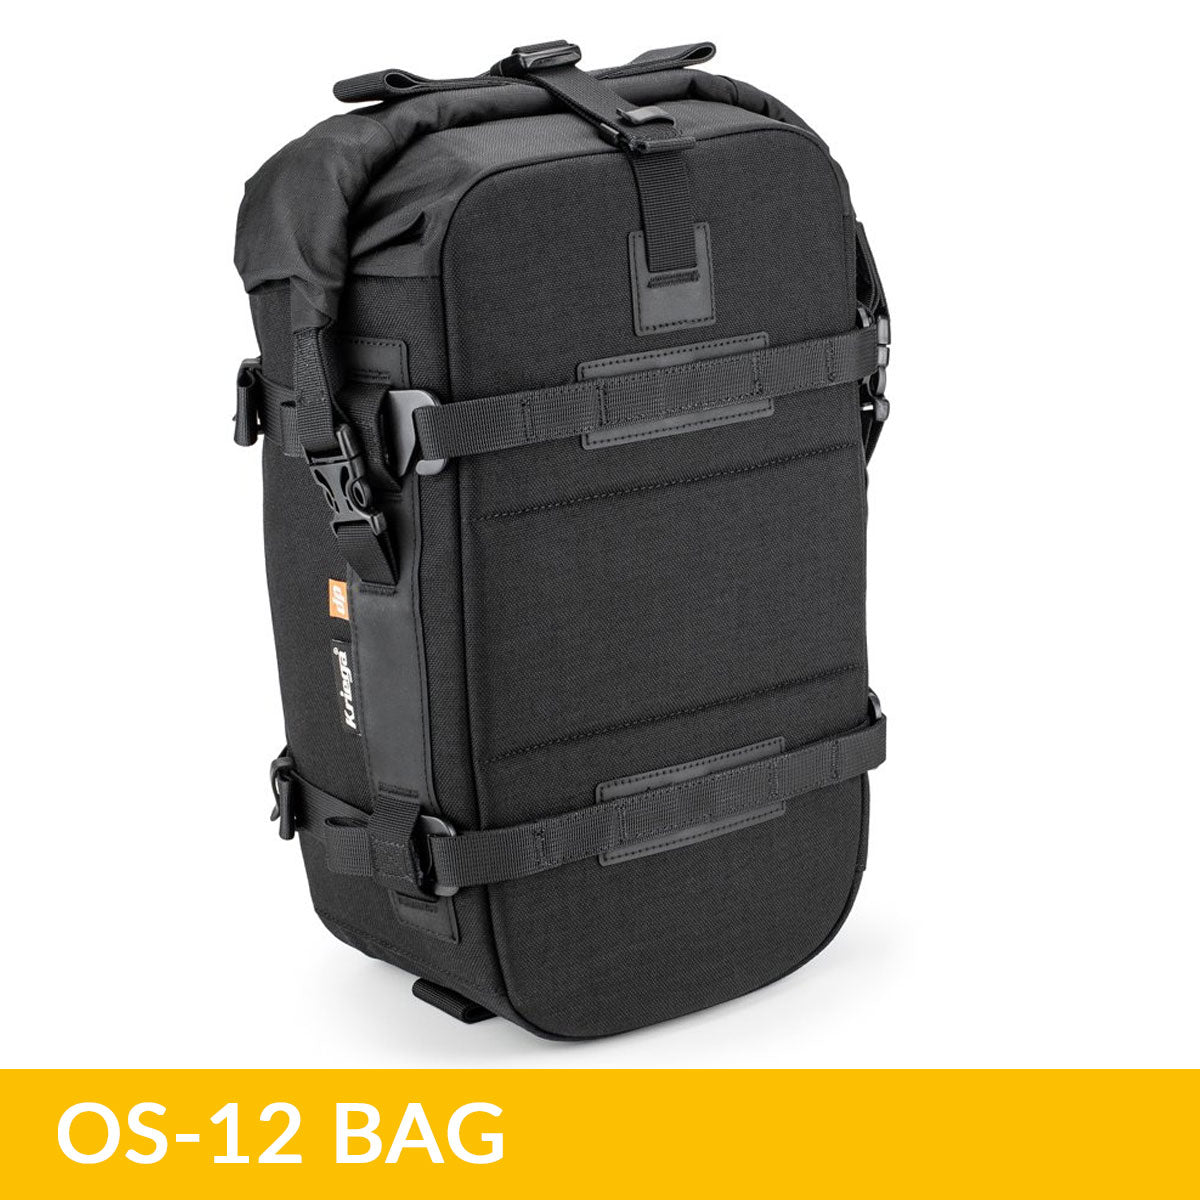 Kriega Overlander-S OS Packs: Serious luggage for serious adventures 12L Back